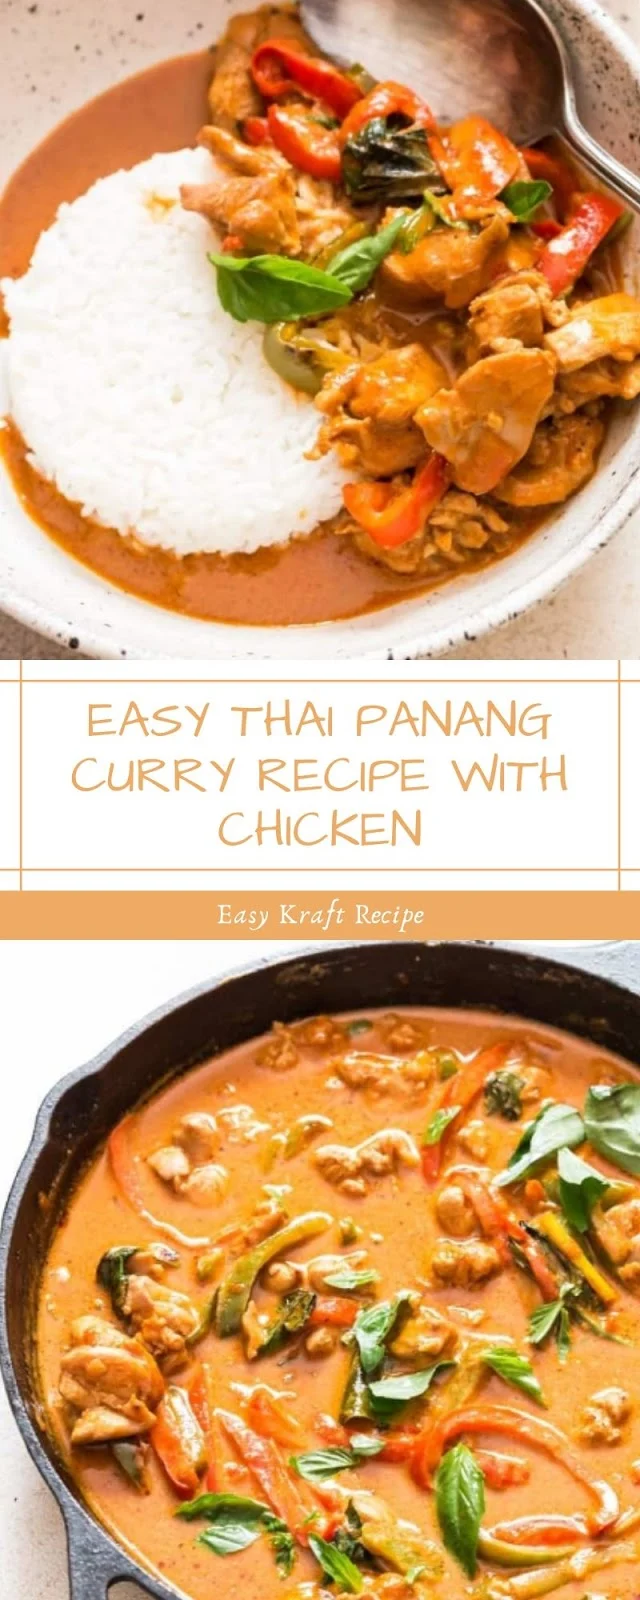 EASY THAI PANANG CURRY RECIPE WITH CHICKEN